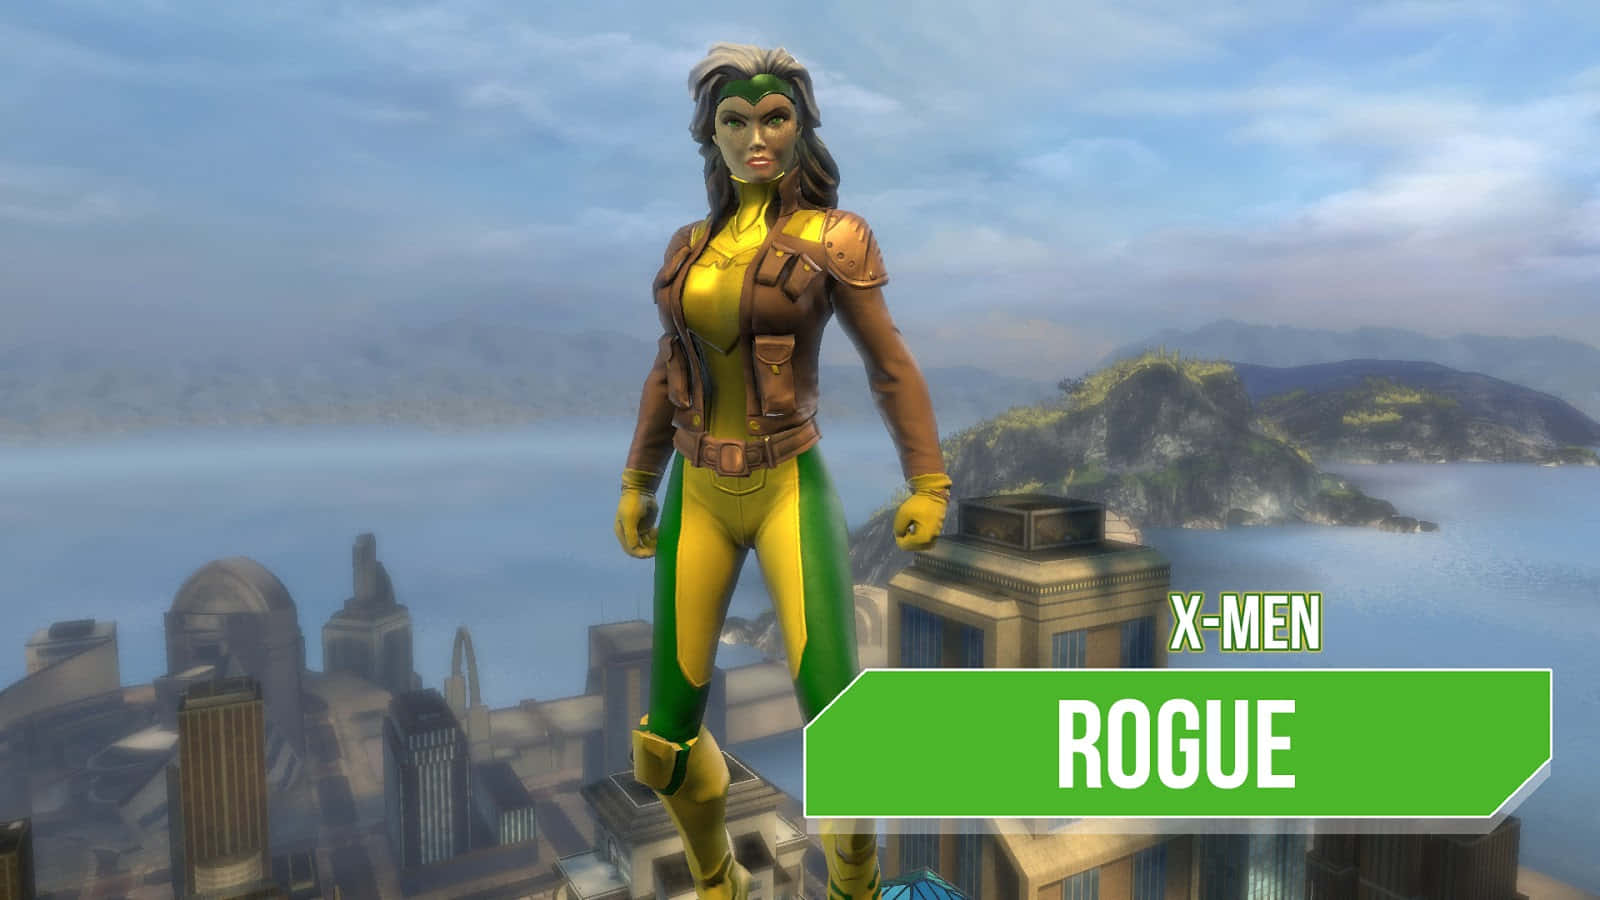 A Woman In A Yellow And Green Costume Is Standing On A City Wallpaper